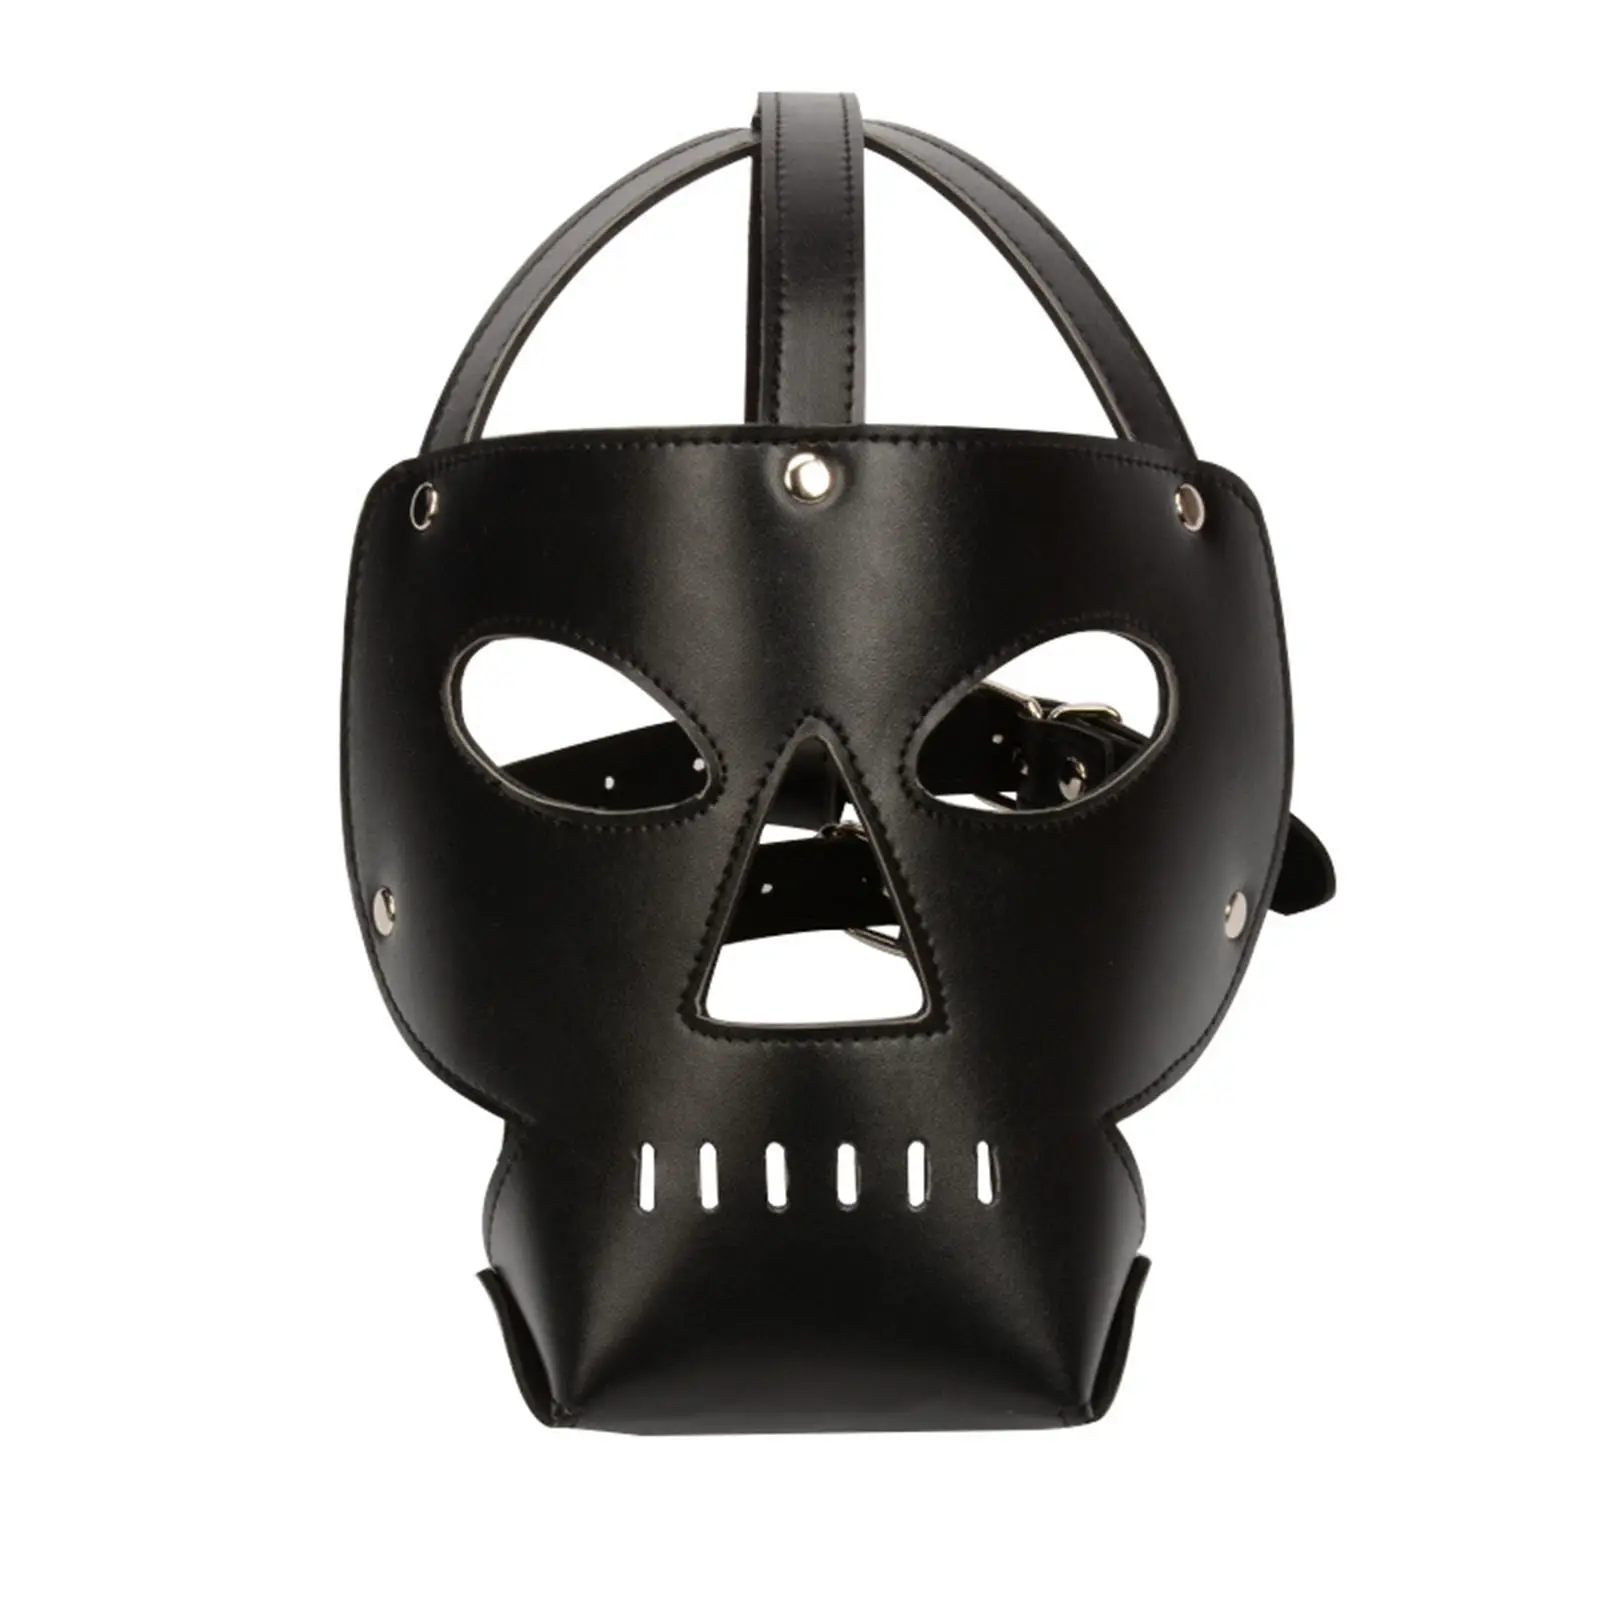 bdsm costume sex toys men Couples adult Sexy Harness PU Leather Face gear Adjustable Metal Buckles Halloween Party Masque Hood%